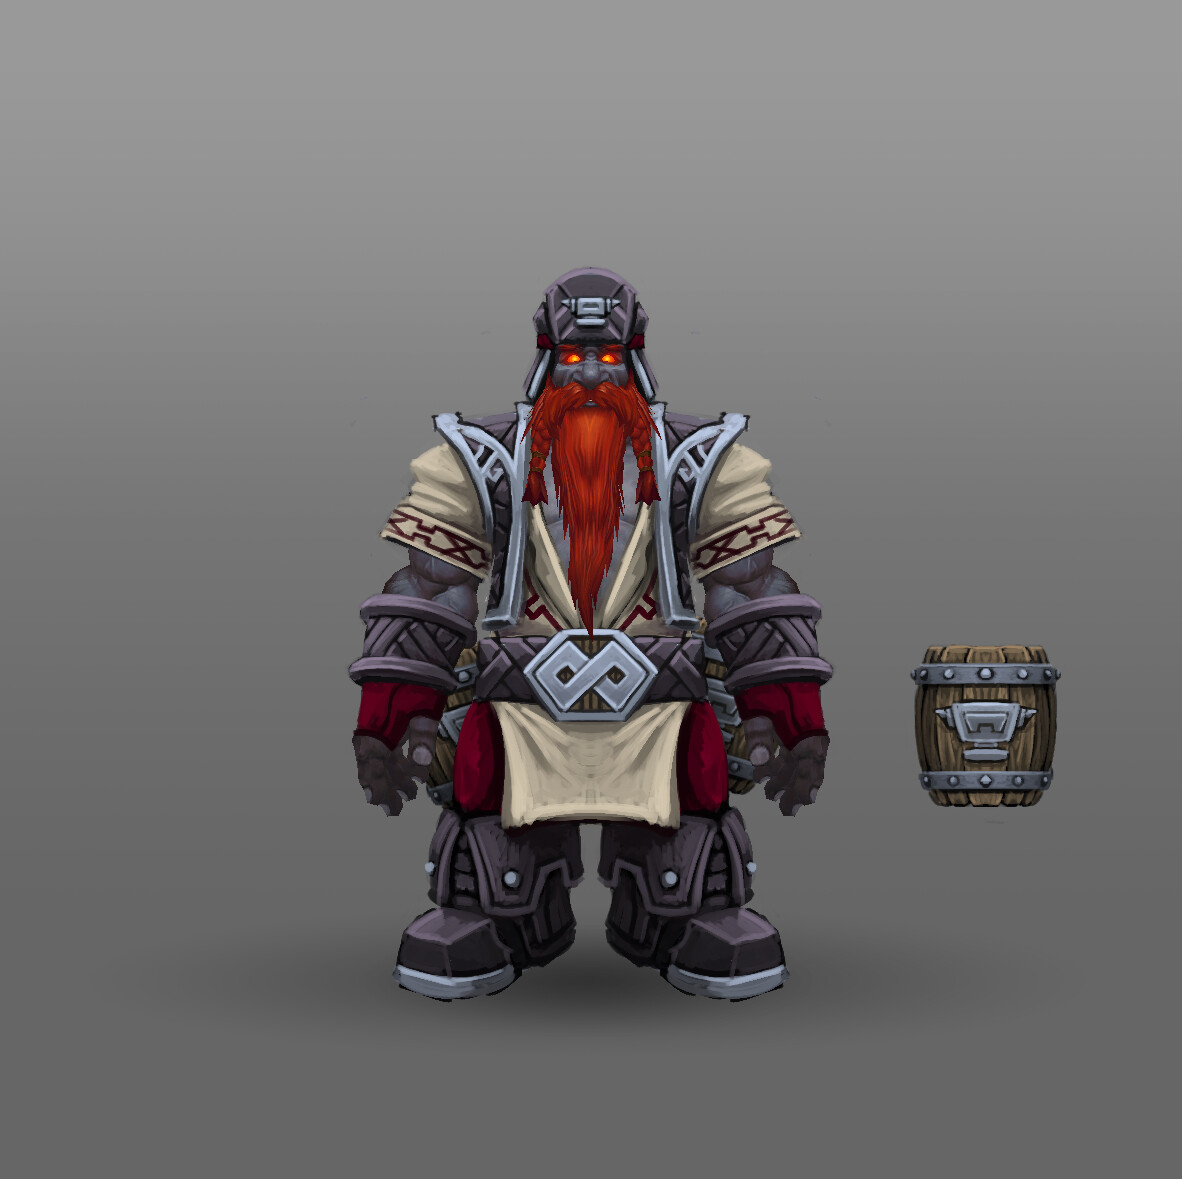 Monk
To give the dark iron monk a unique spin, I went for an innkeeper theme. I wanted to avoid a brimmed hat, so I tried out the 